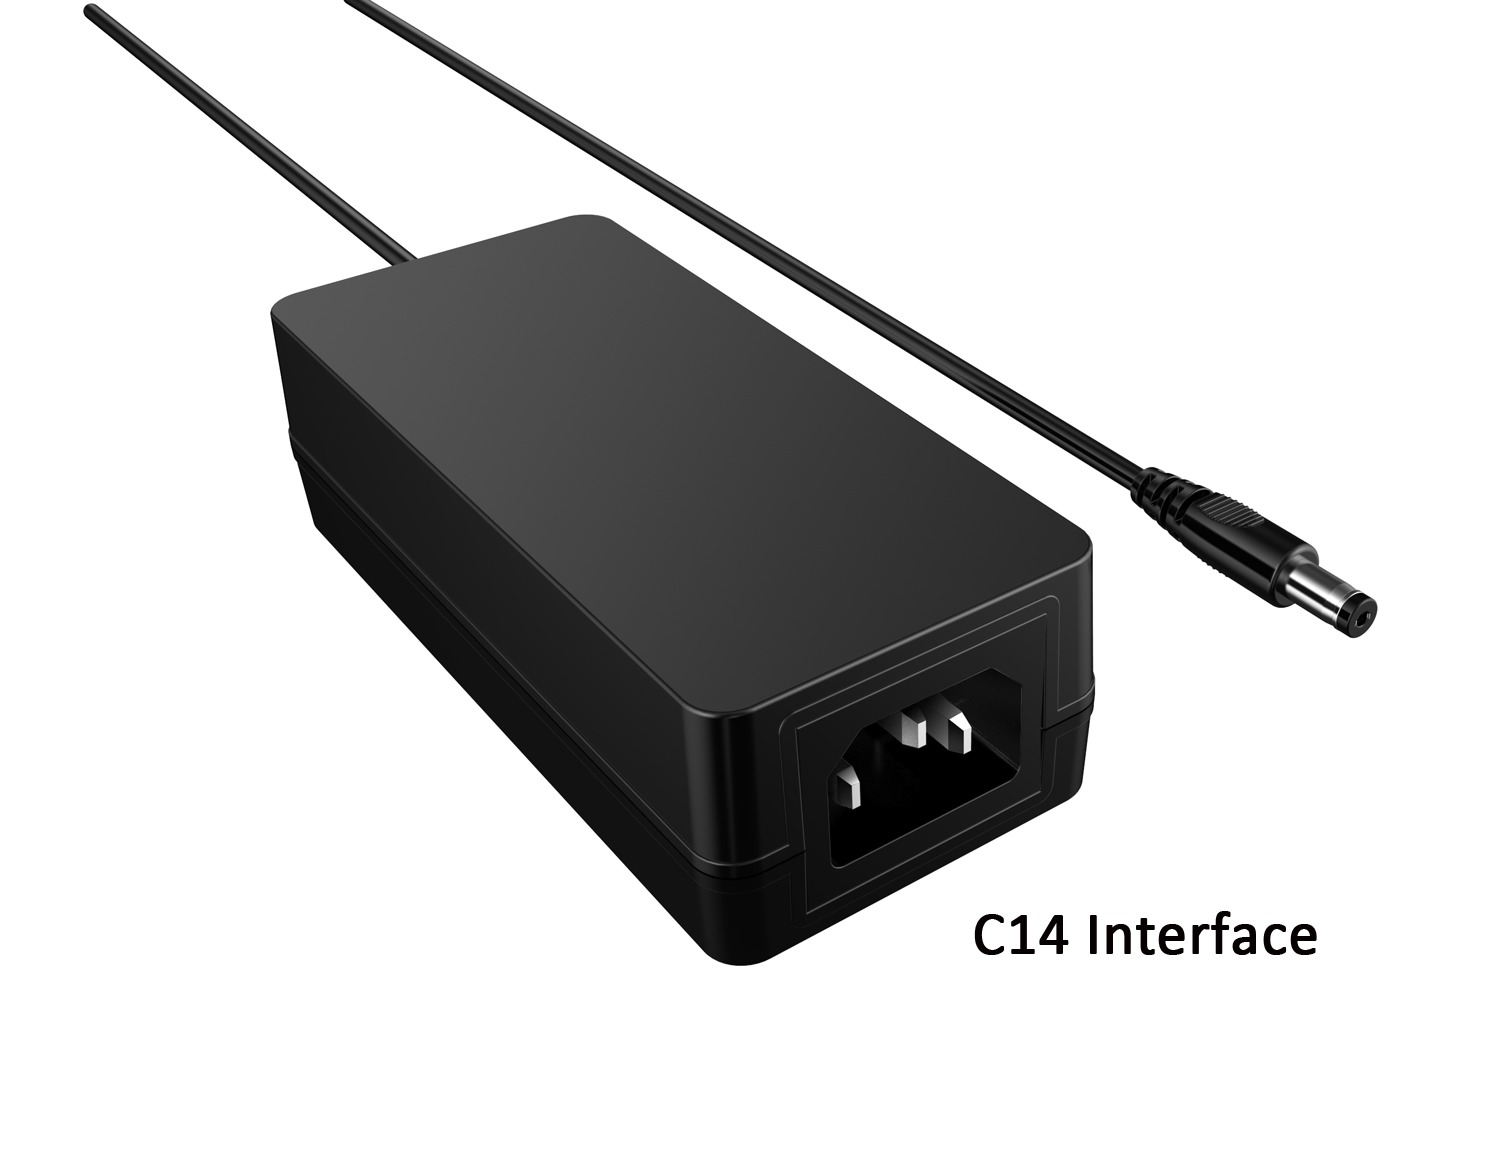 08-A653 With C14 Interface